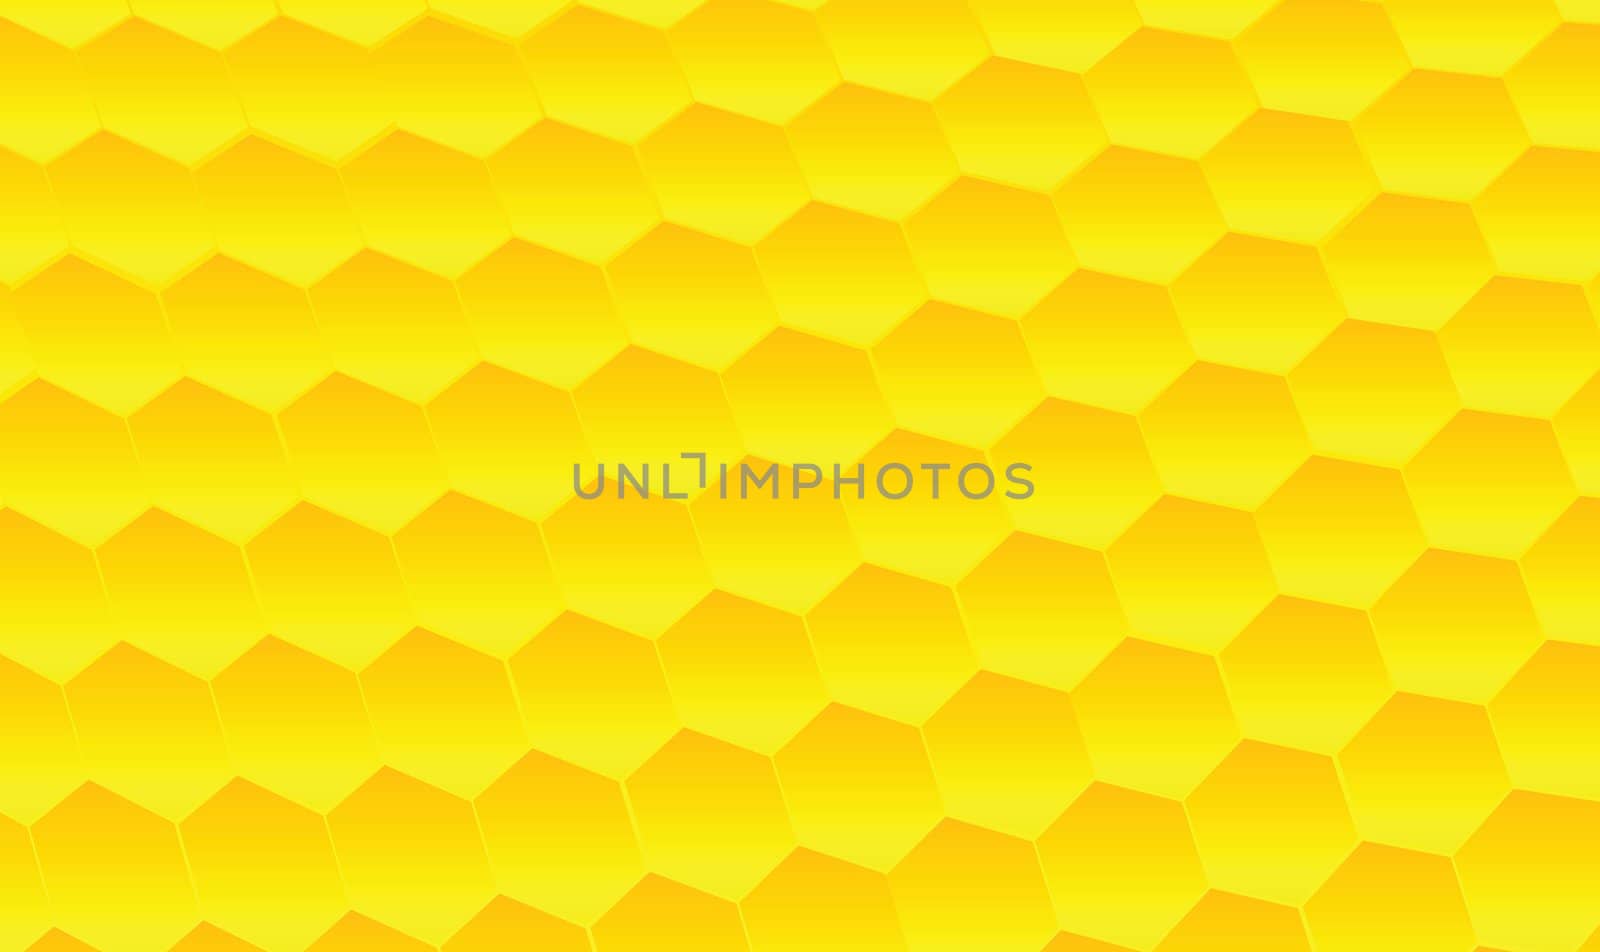 Background texture with honeycomb design